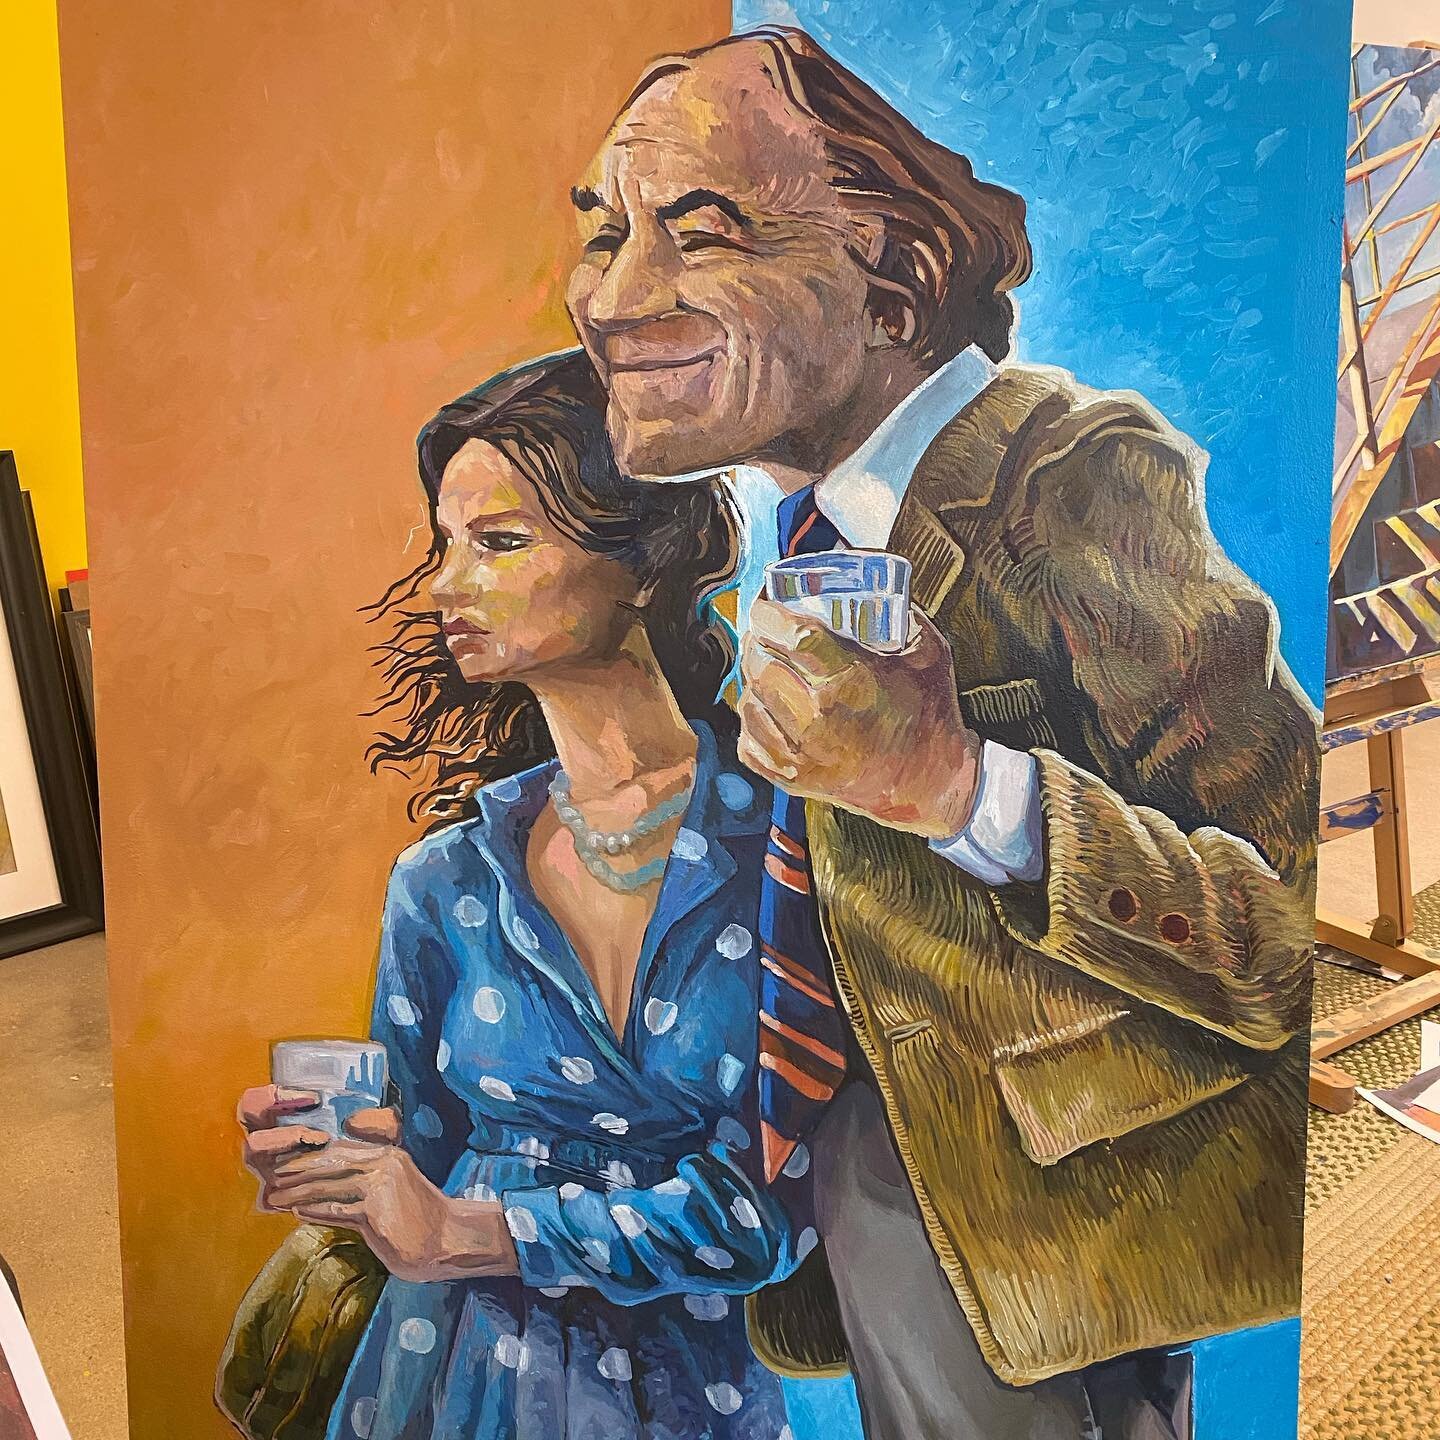 About 70% through a painting. Suddenly Realized I was painting Ron Paul! 

#RonPaul #Random #politics #oilpainting #caricature #art #tulsaoklahoma